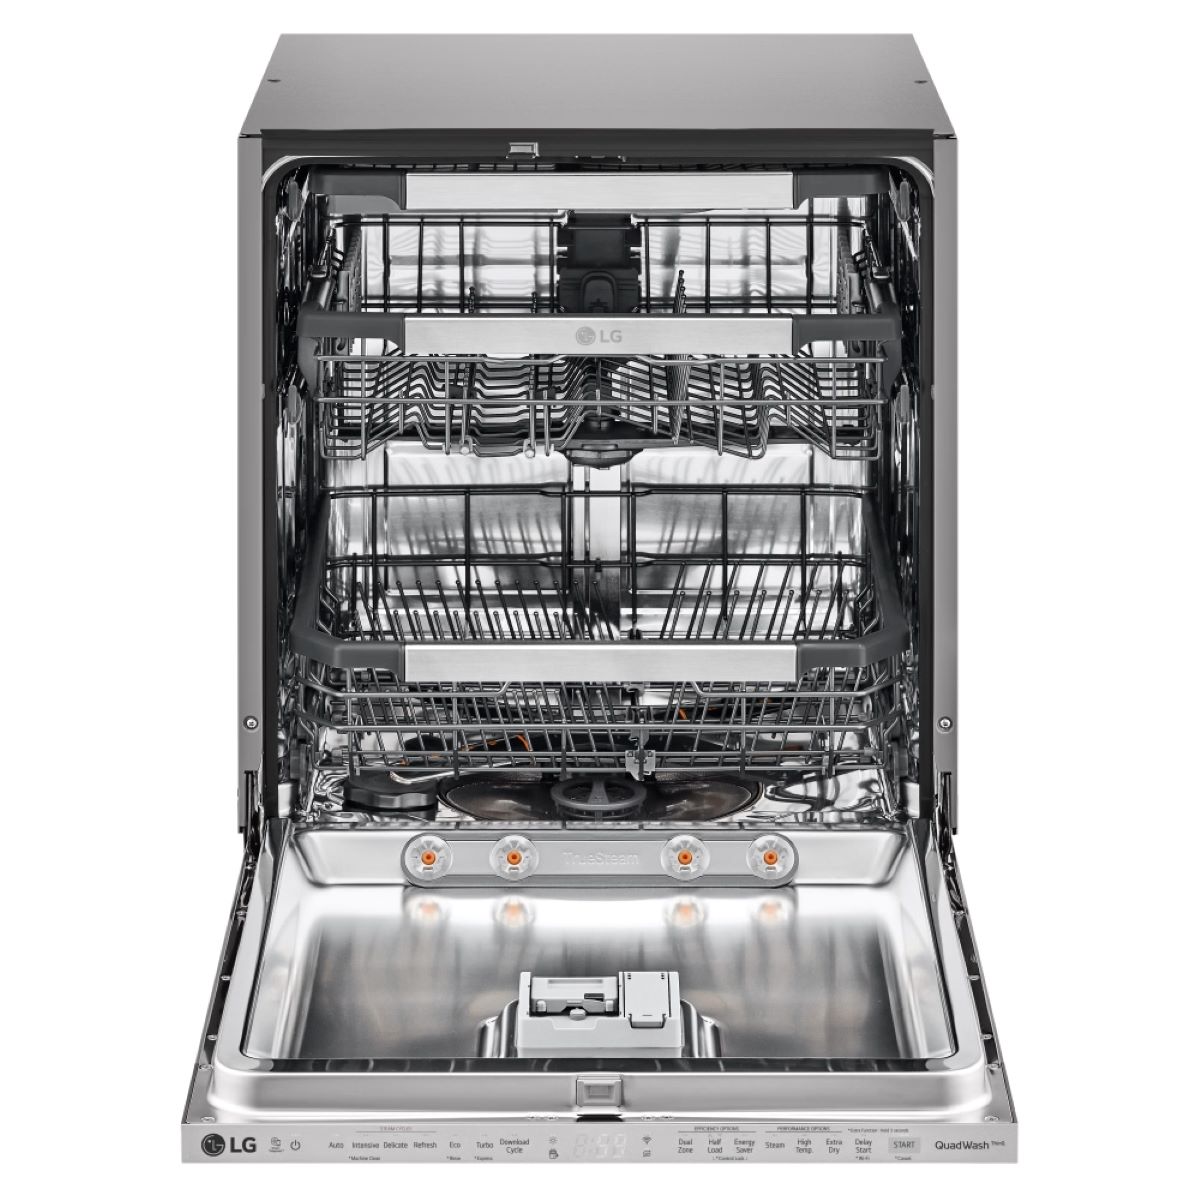 How To Fix The Error Code F8 For LG Dishwasher